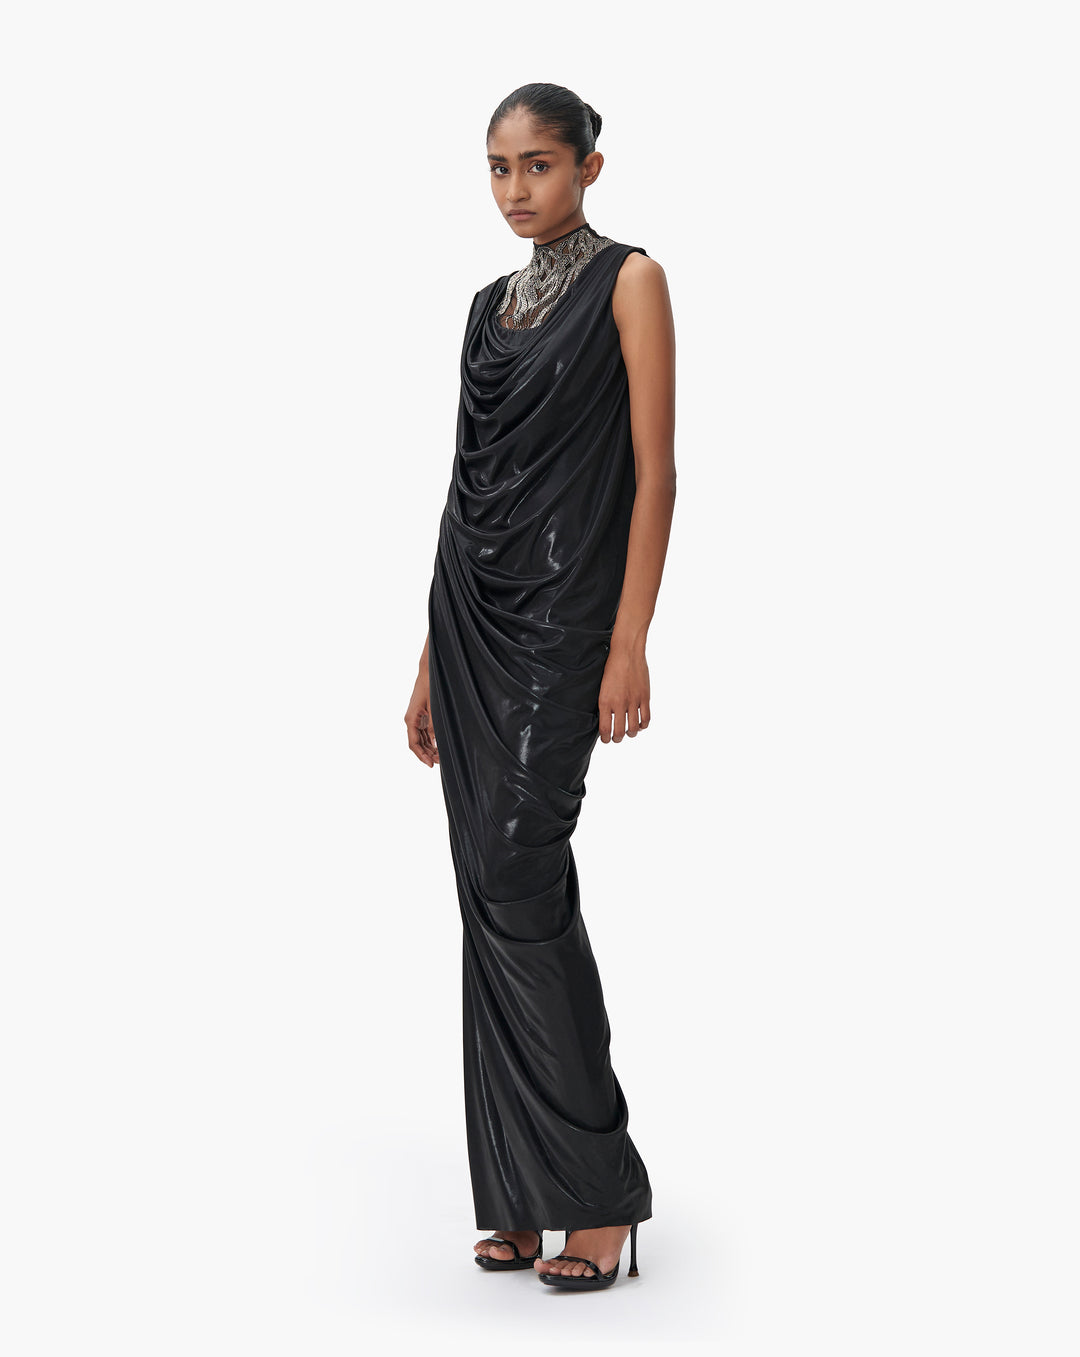 The Meteoric Cowl Draped Gown